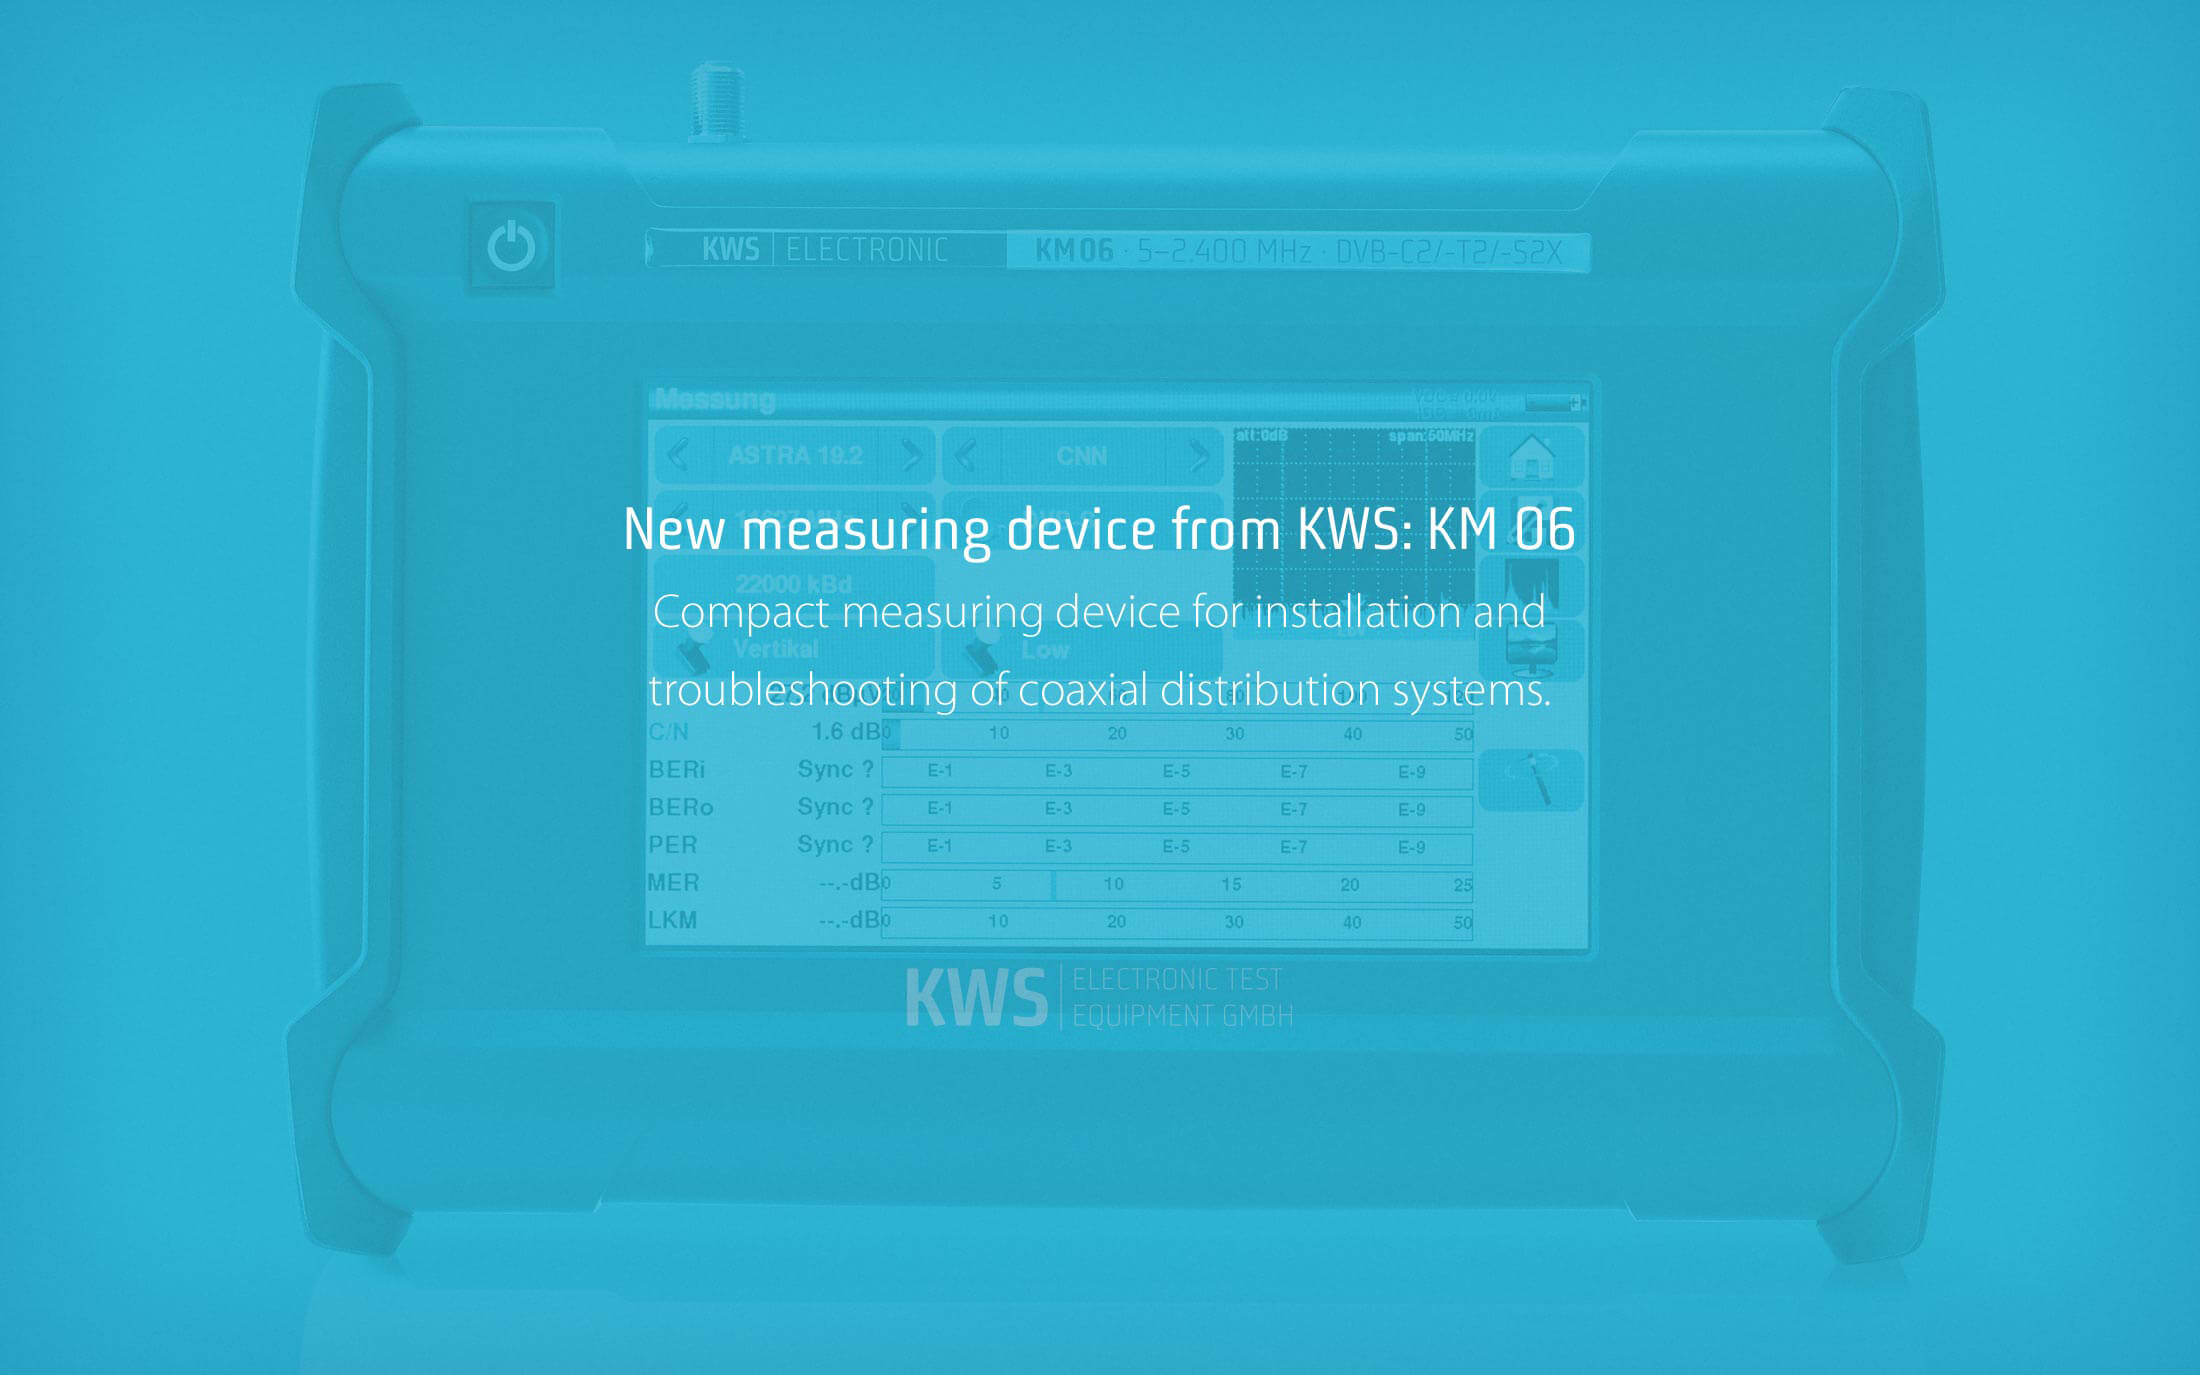 KWS Electronic News 2020: Our new measuring device KM 06